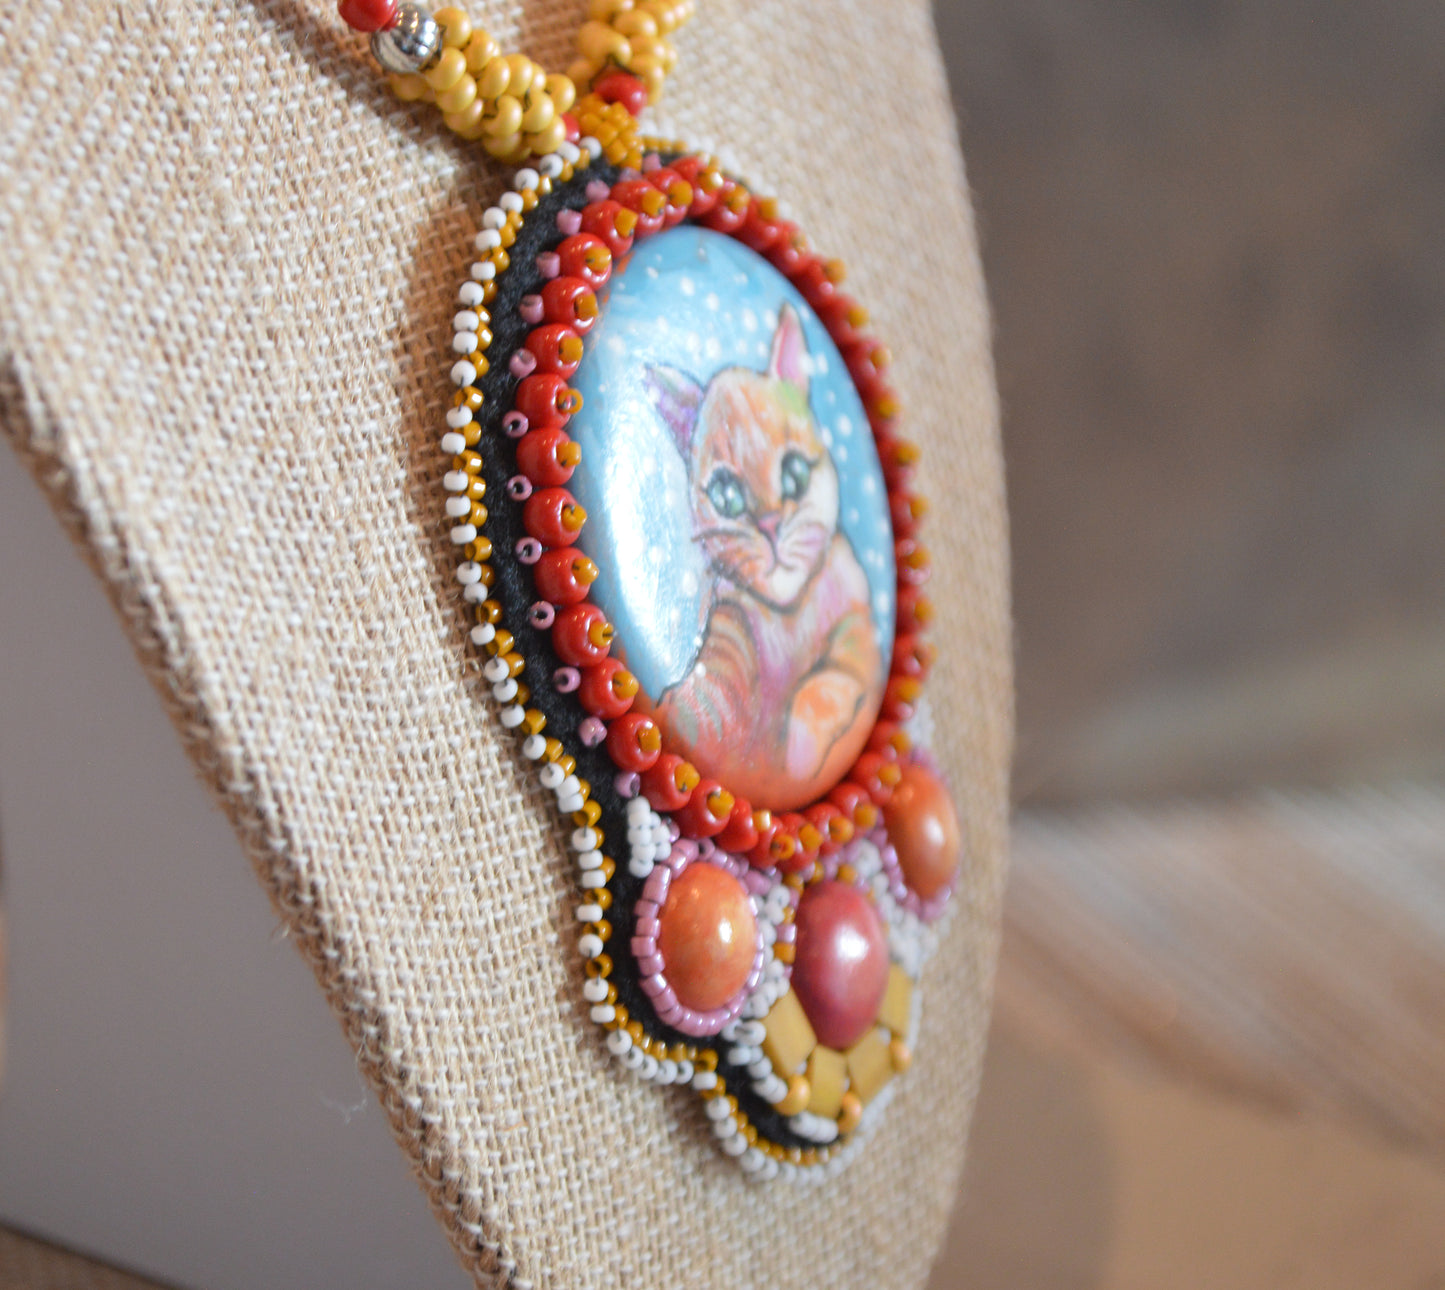 Ginger Tabby Cat Pendant / Orange cat necklace jewelry / Hand painted art piece animal painting bead embroidery